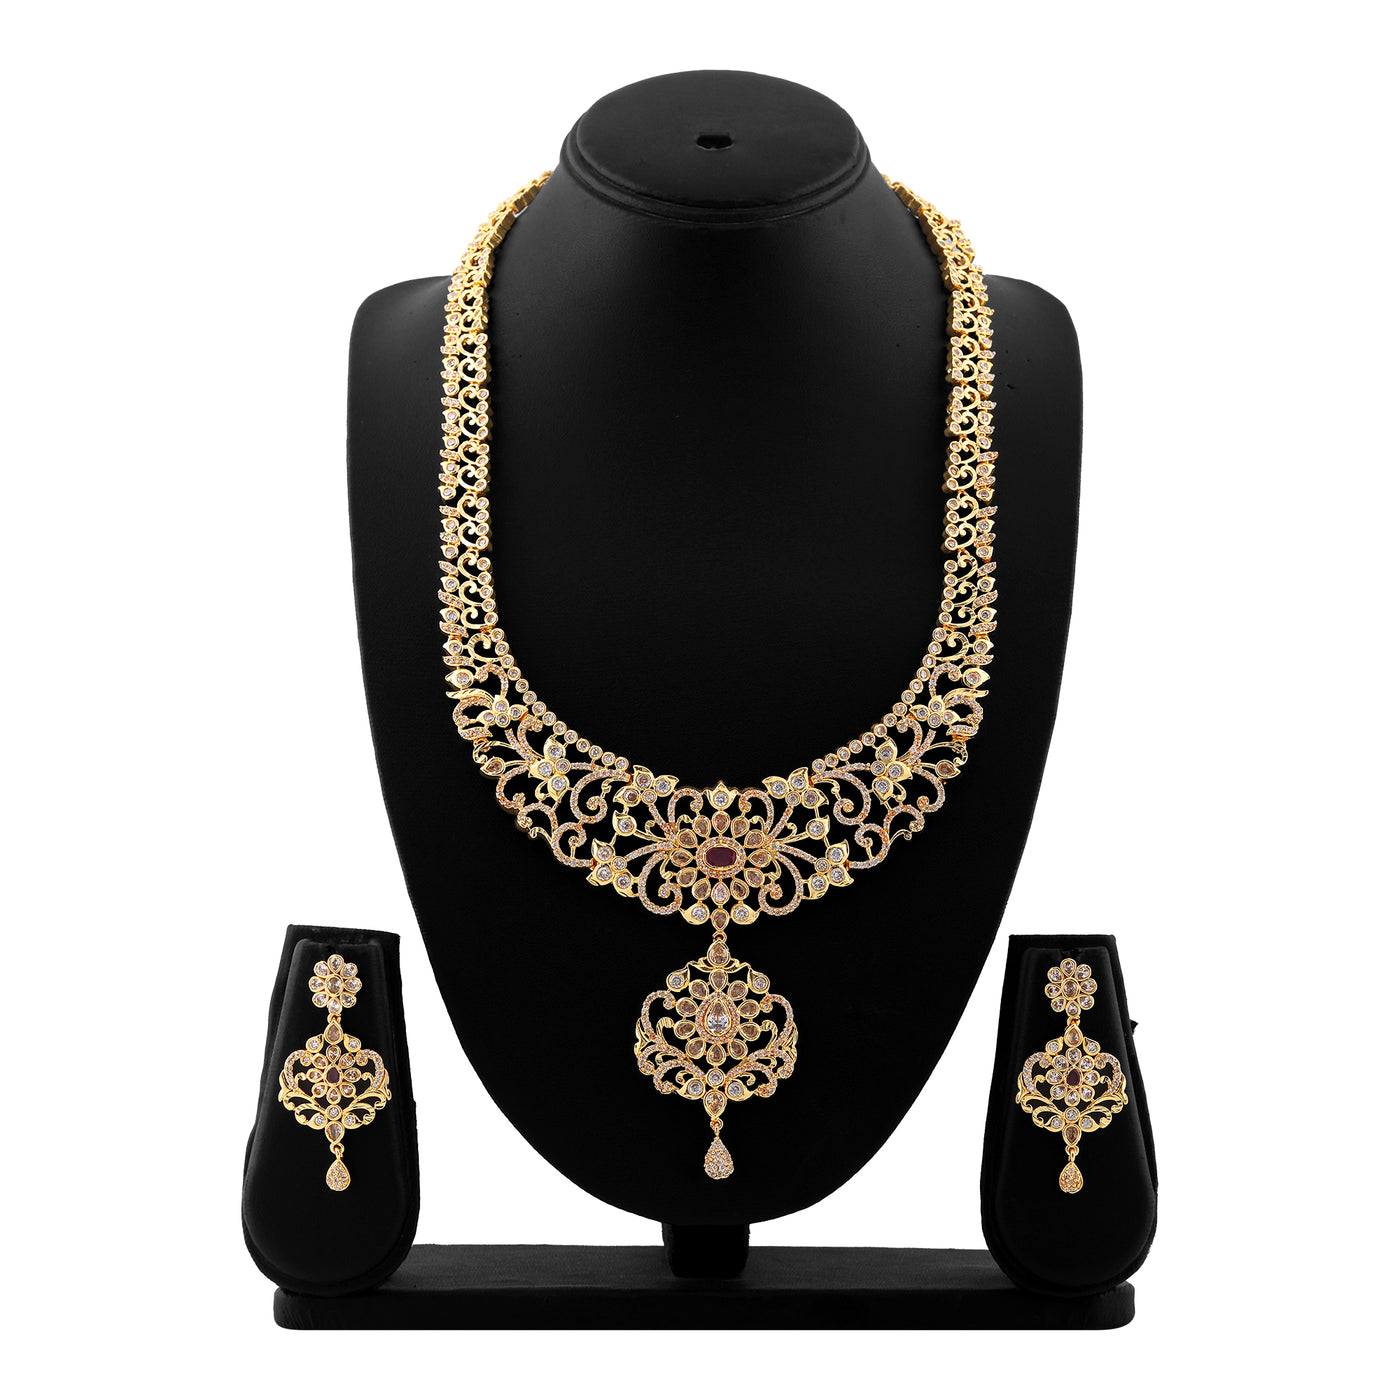 Estele Gold Plated CZ Stunning Filgari Bridal Necklace Set with Colored Stones & Pearl for Women